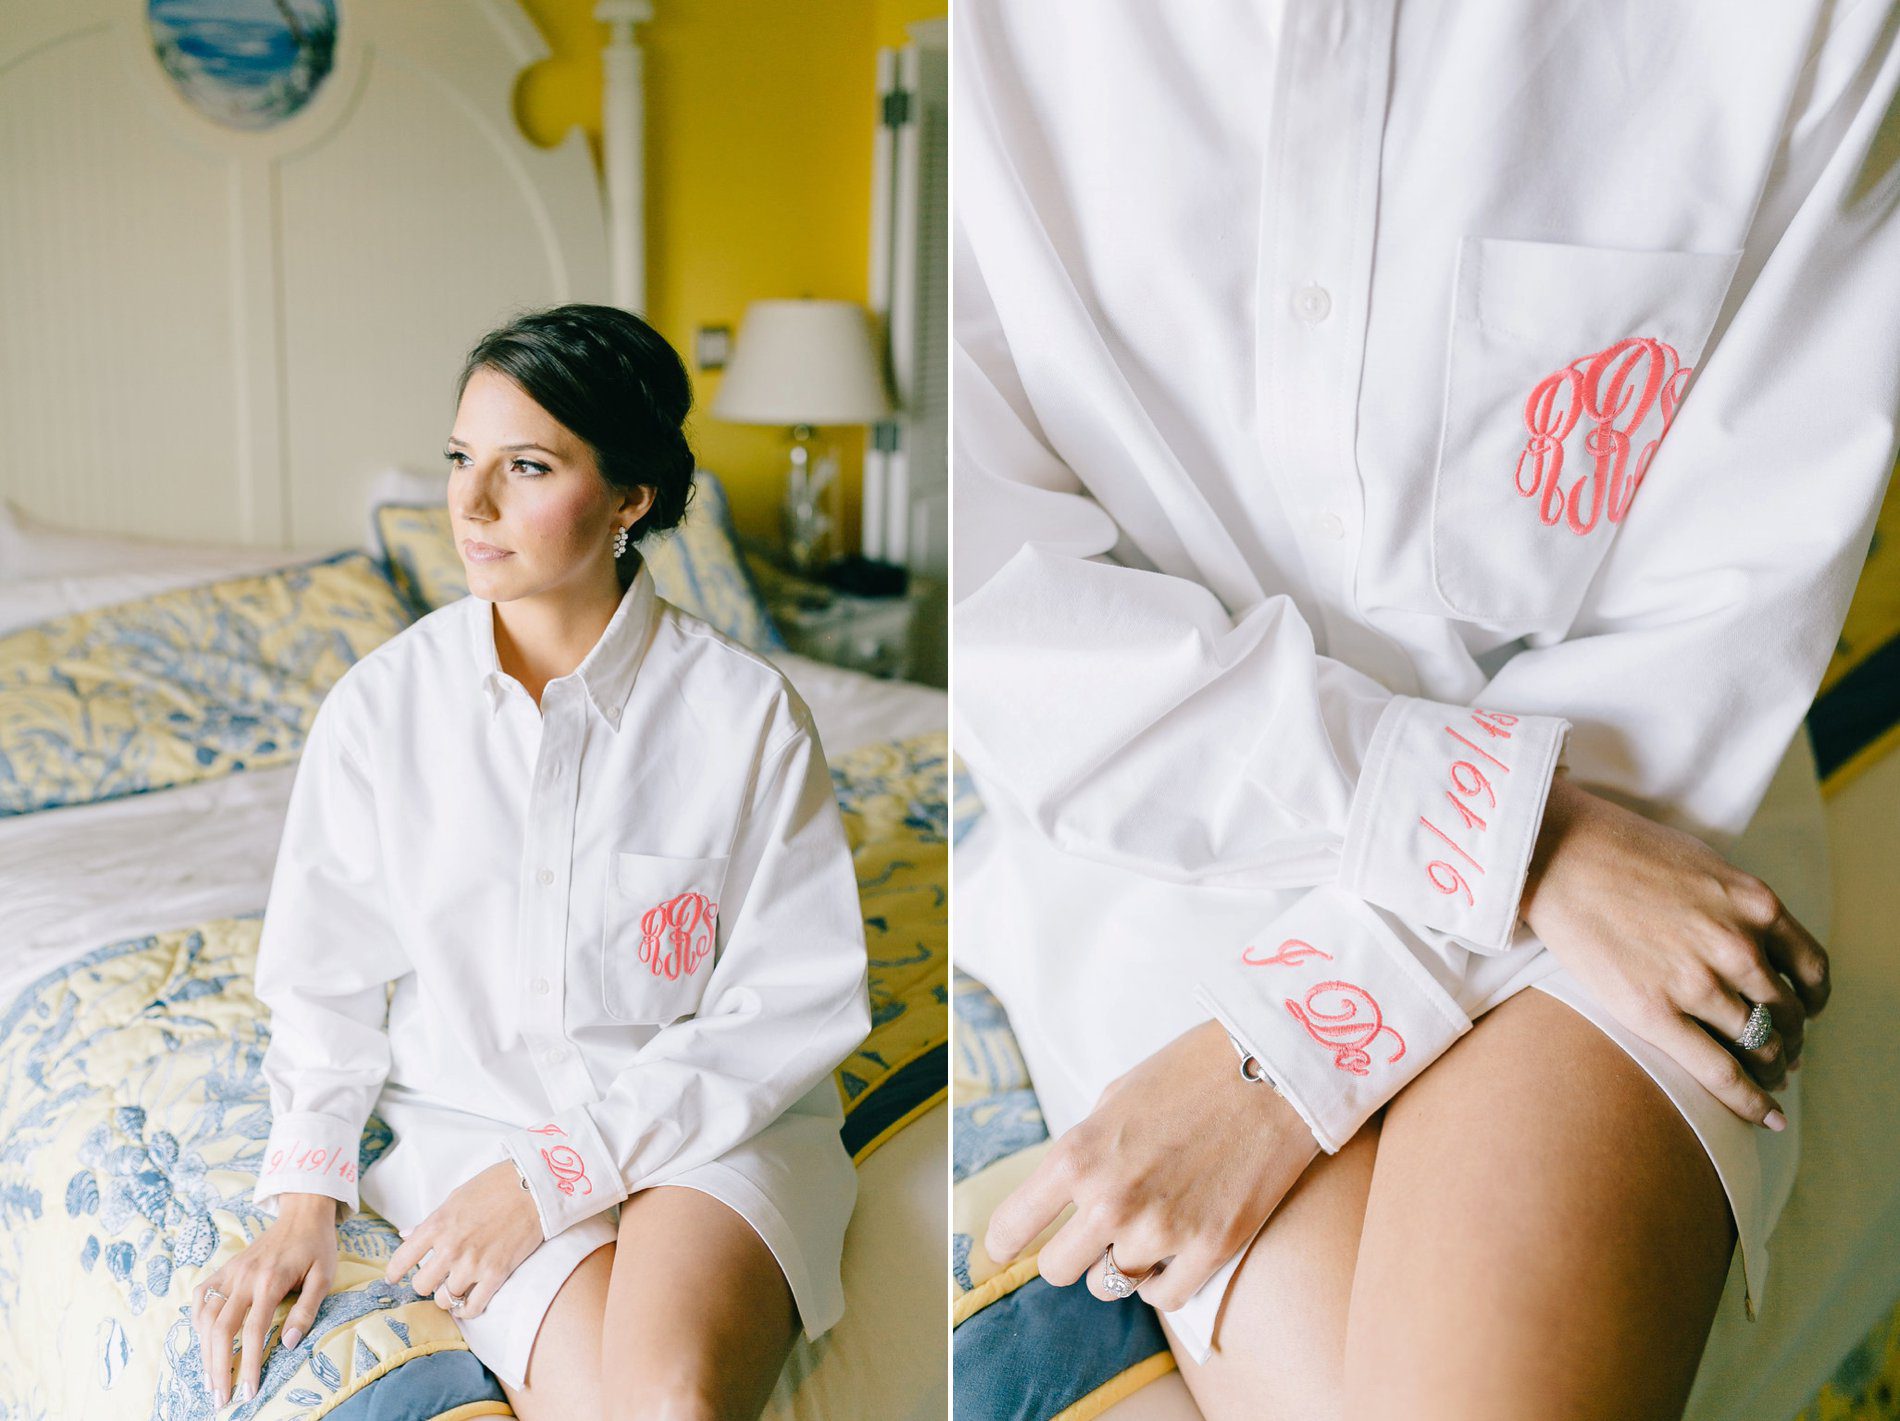 Monogrammed shirt for bride to wear while getting ready